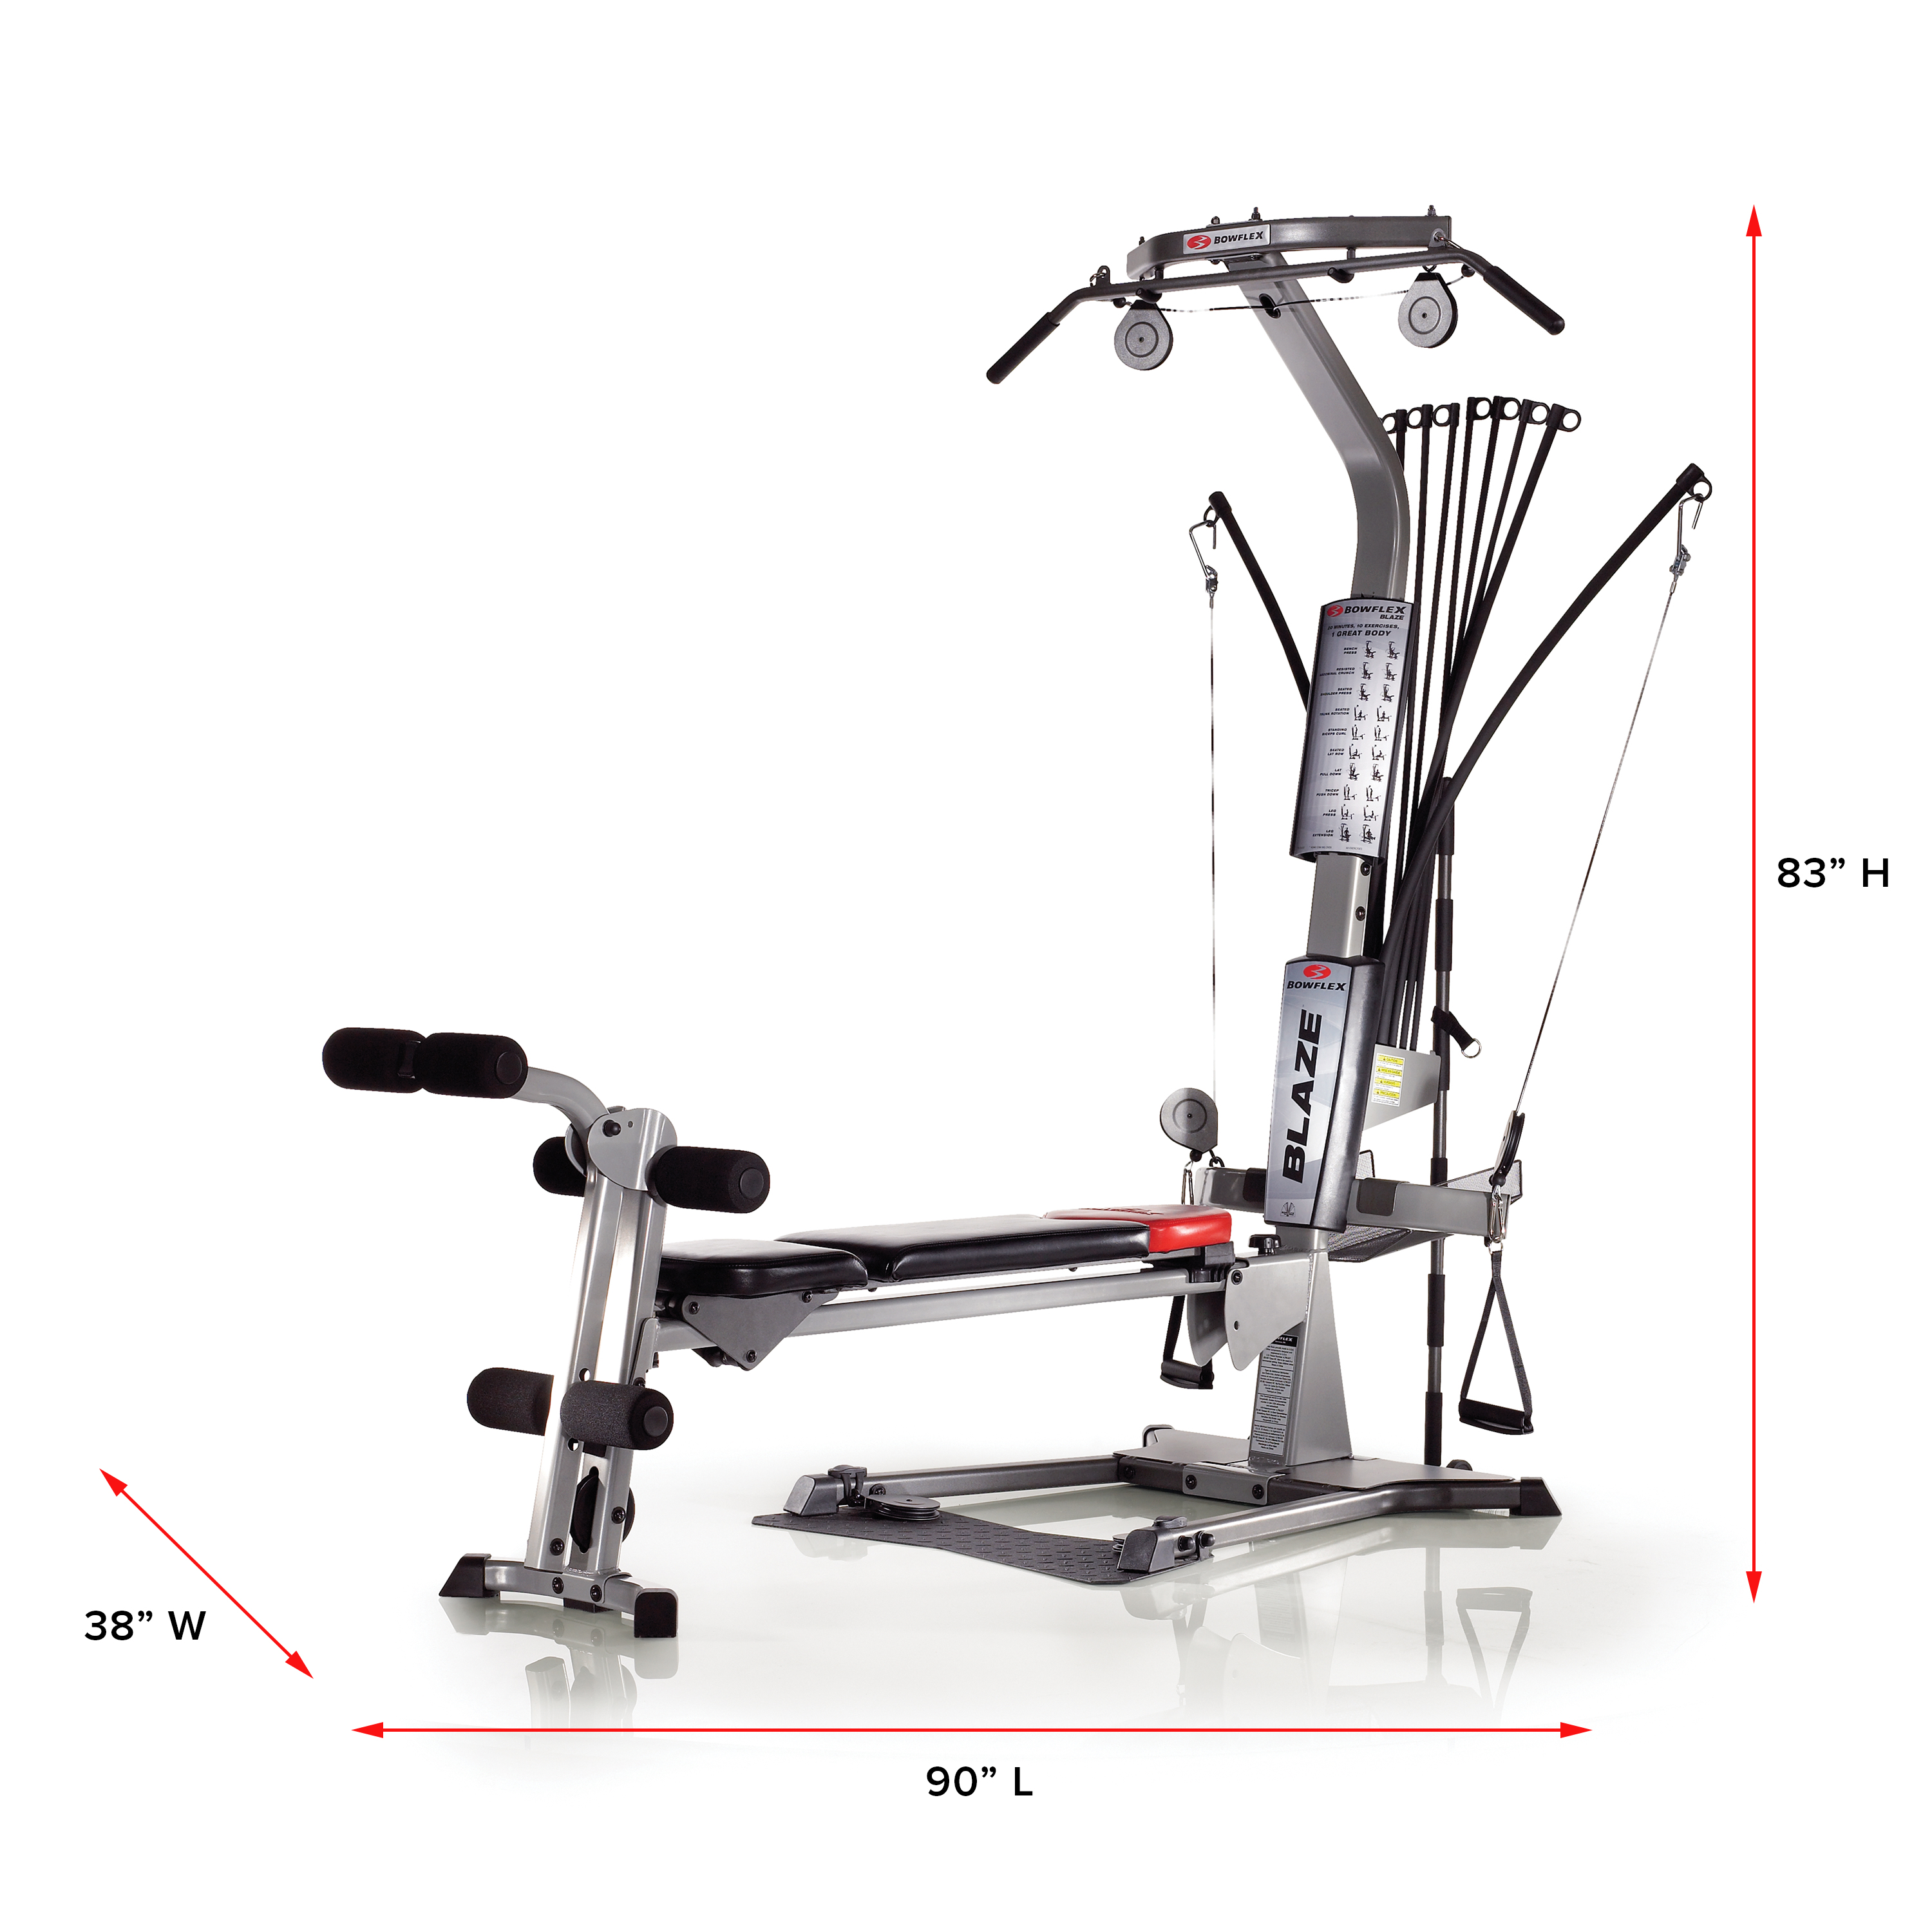 Bowflex Blaze Full Body Workout Machine for Home Gym with 210 Pound Resistance - image 9 of 11